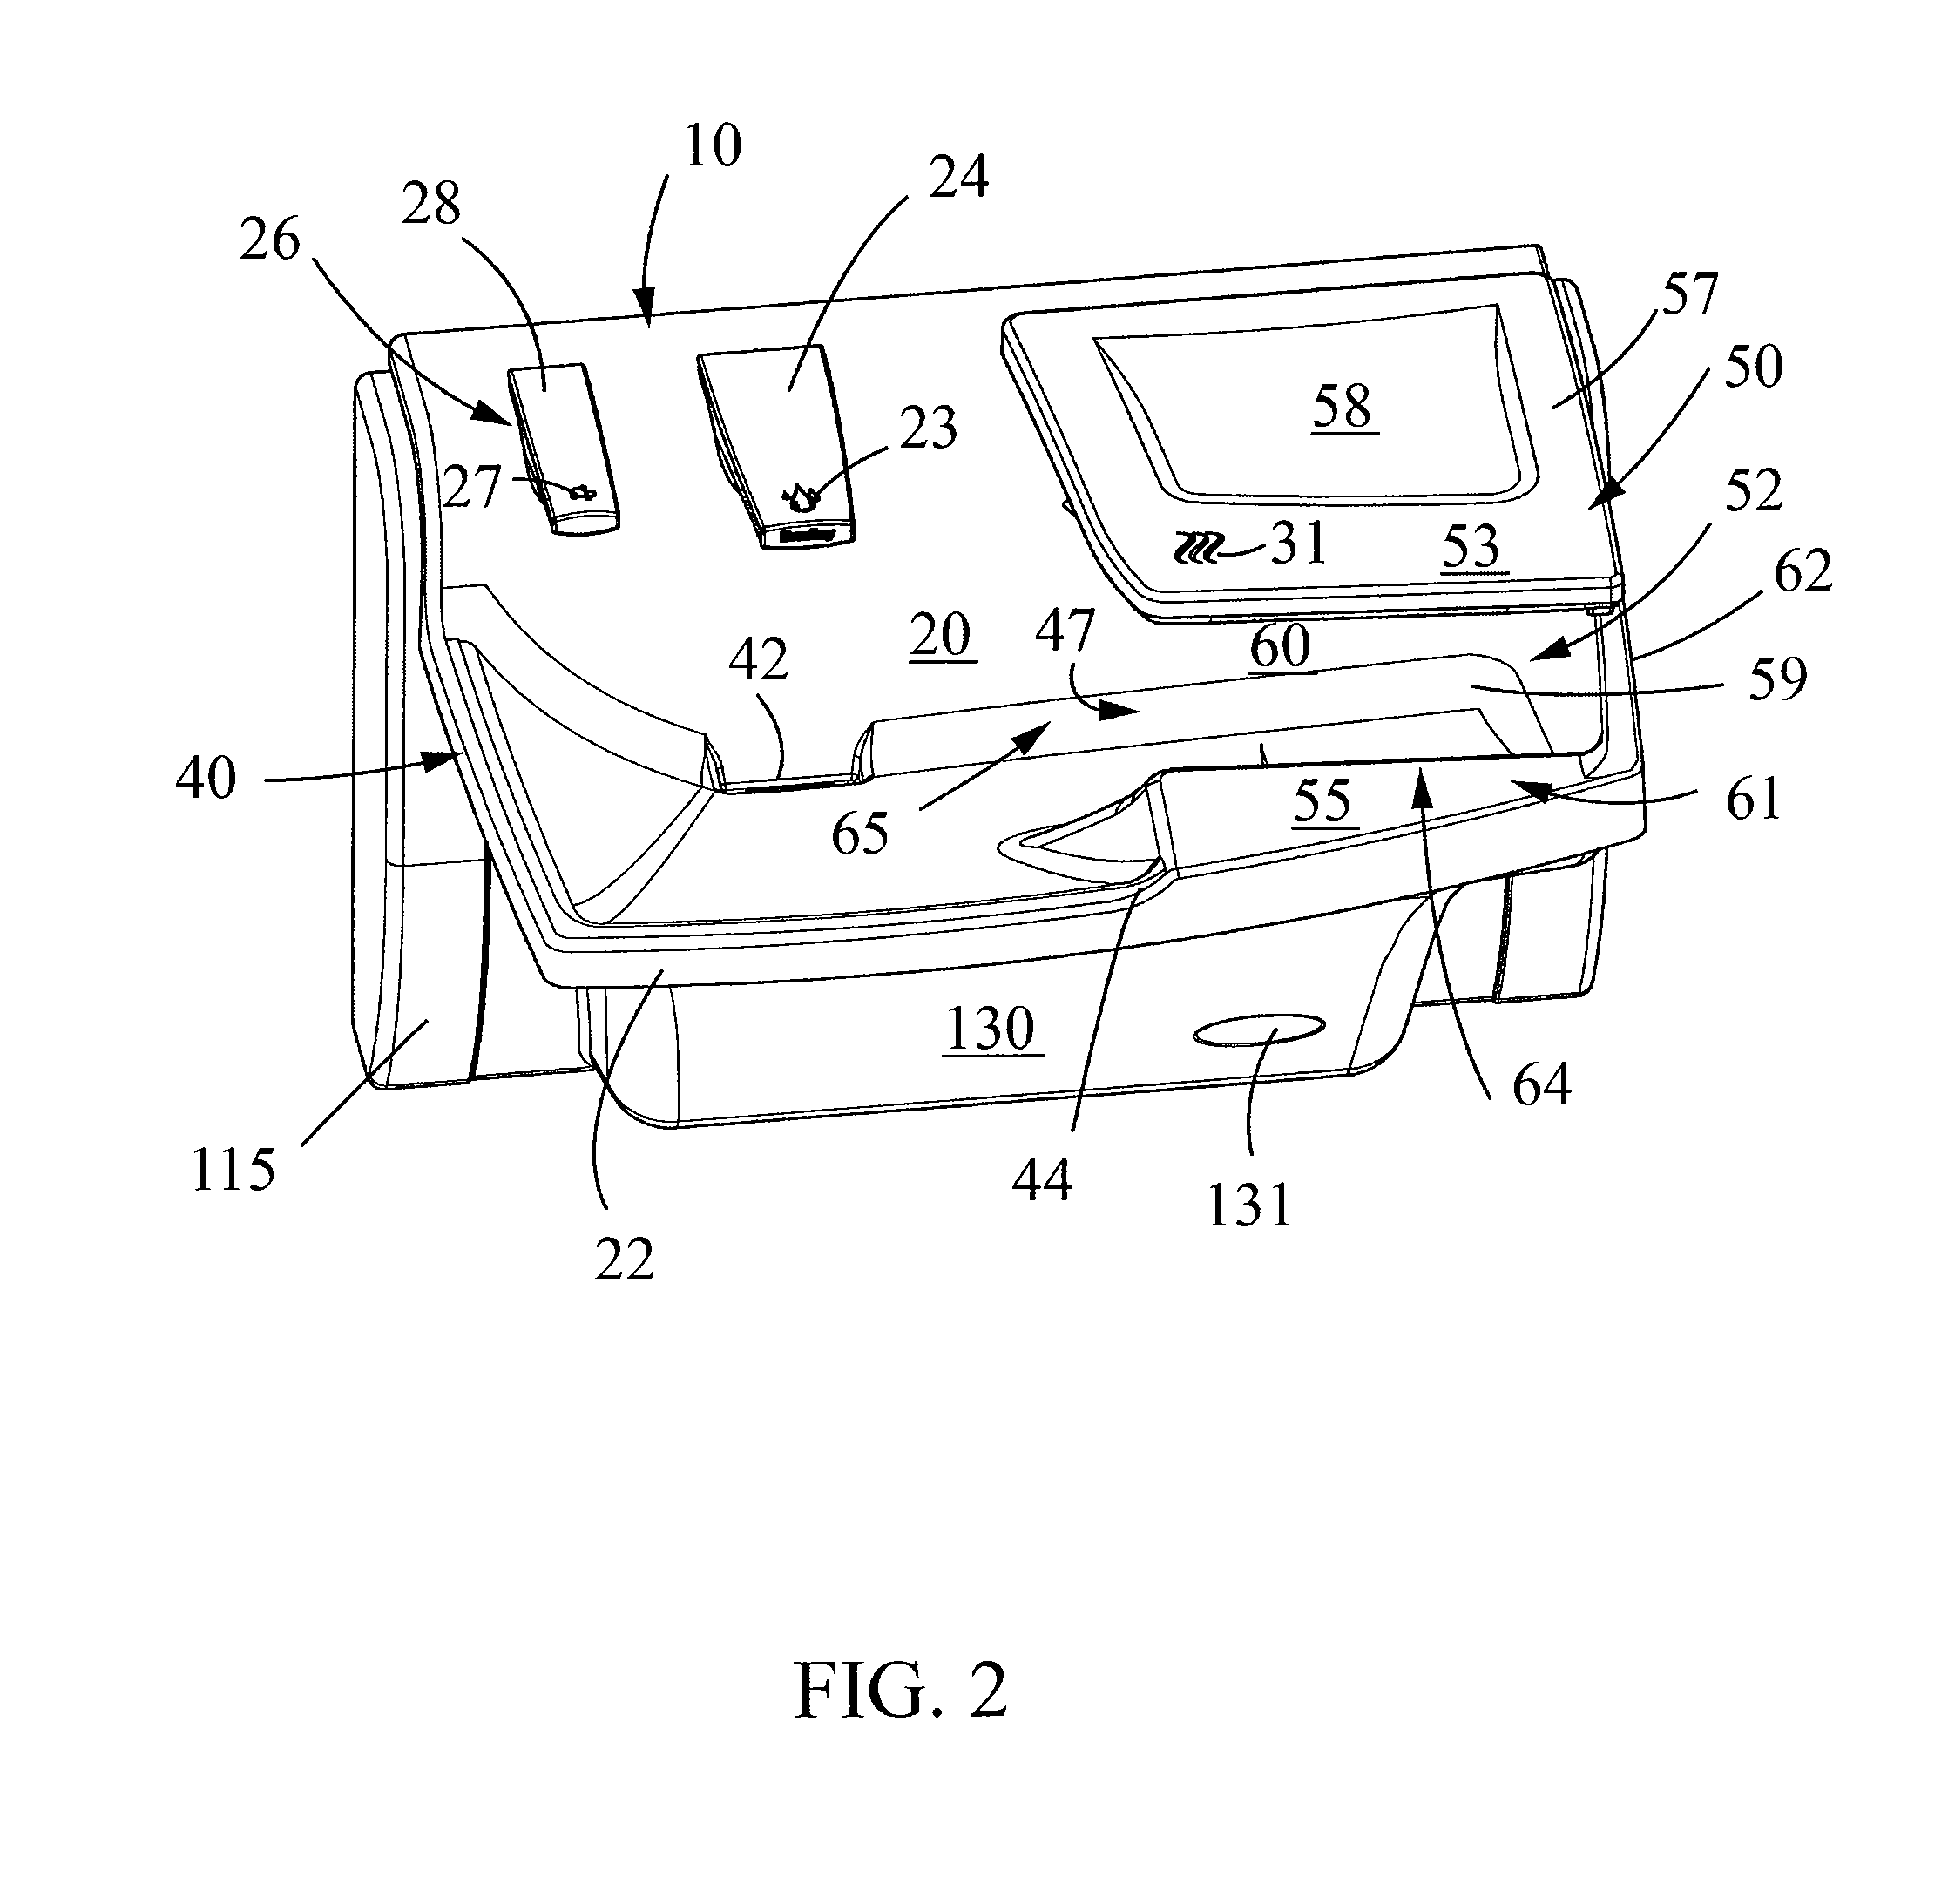 Lavatory System with Overflow Prevention and Other Features